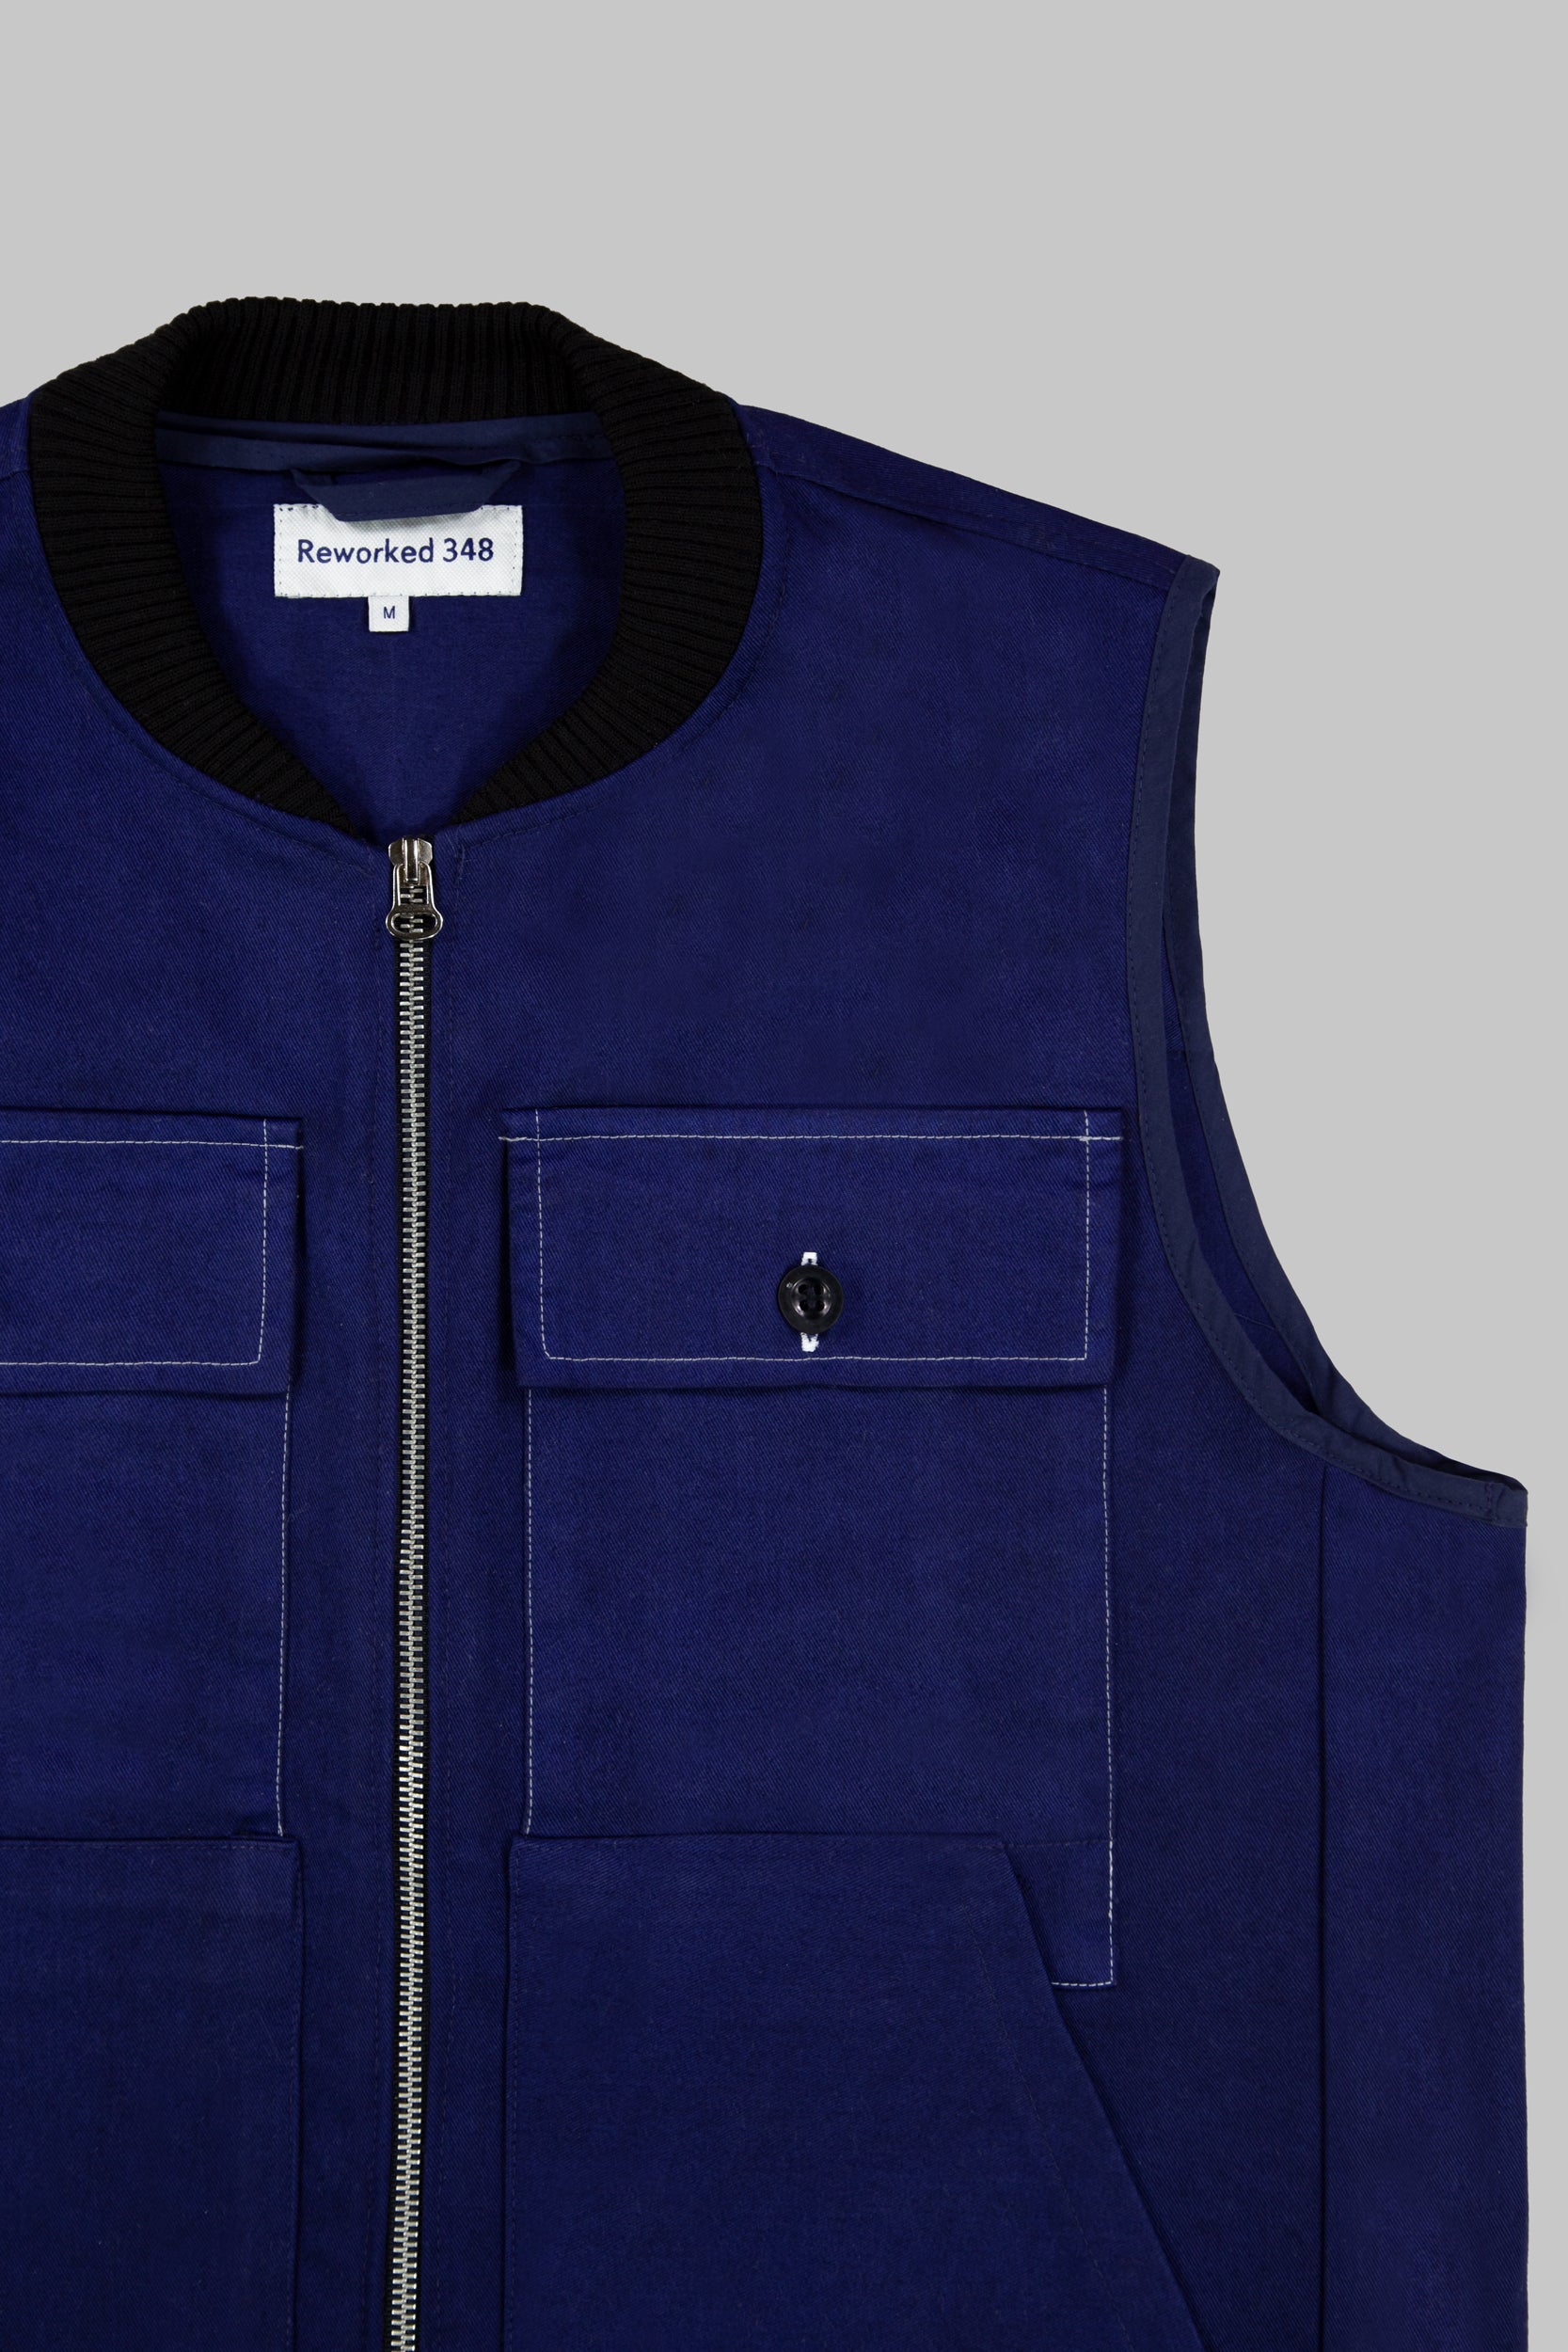 J Smith & Co Coverall Vest Works Blue